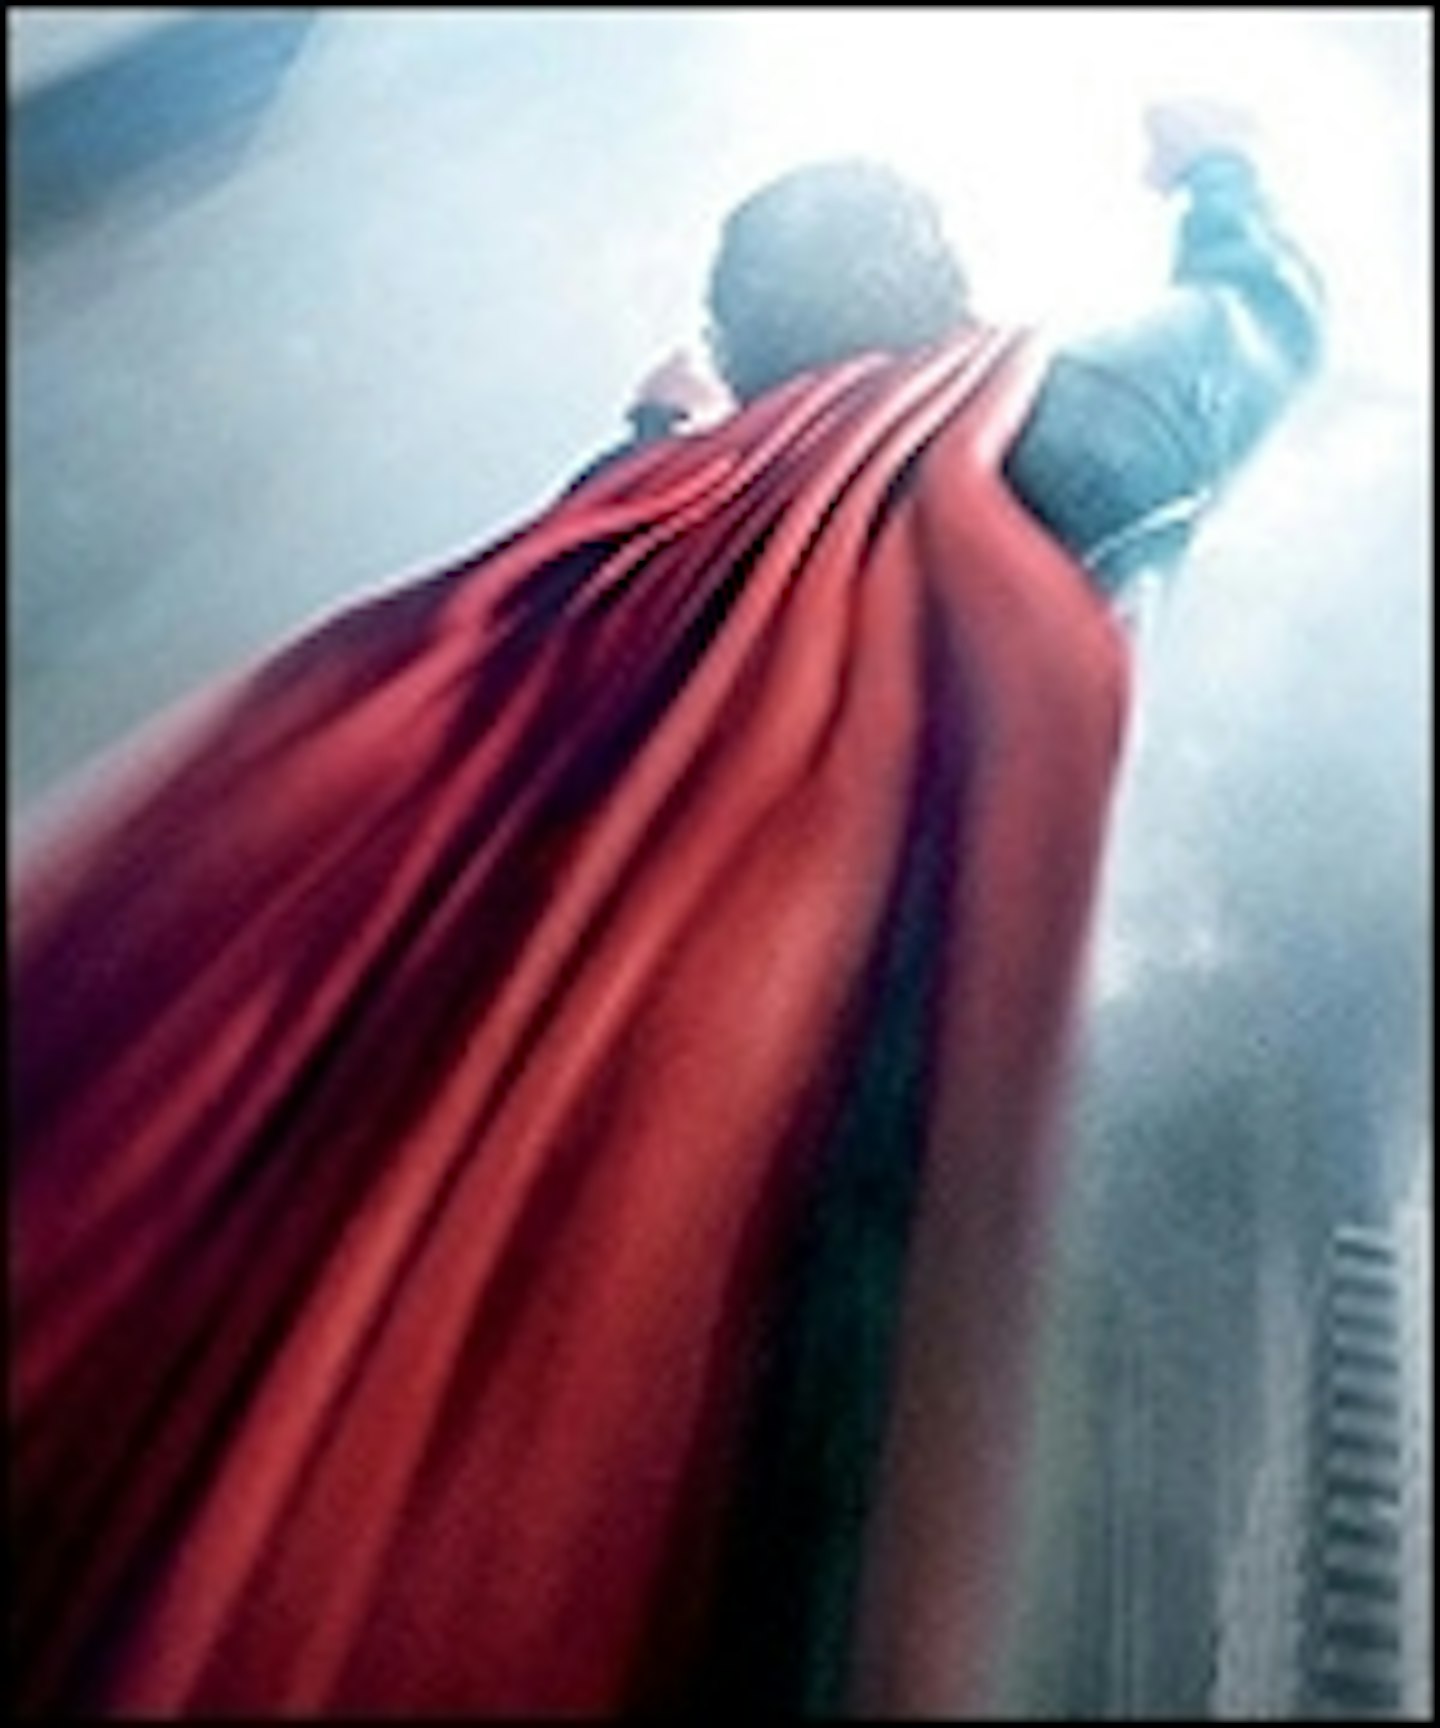 Two New Man Of Steel Posters